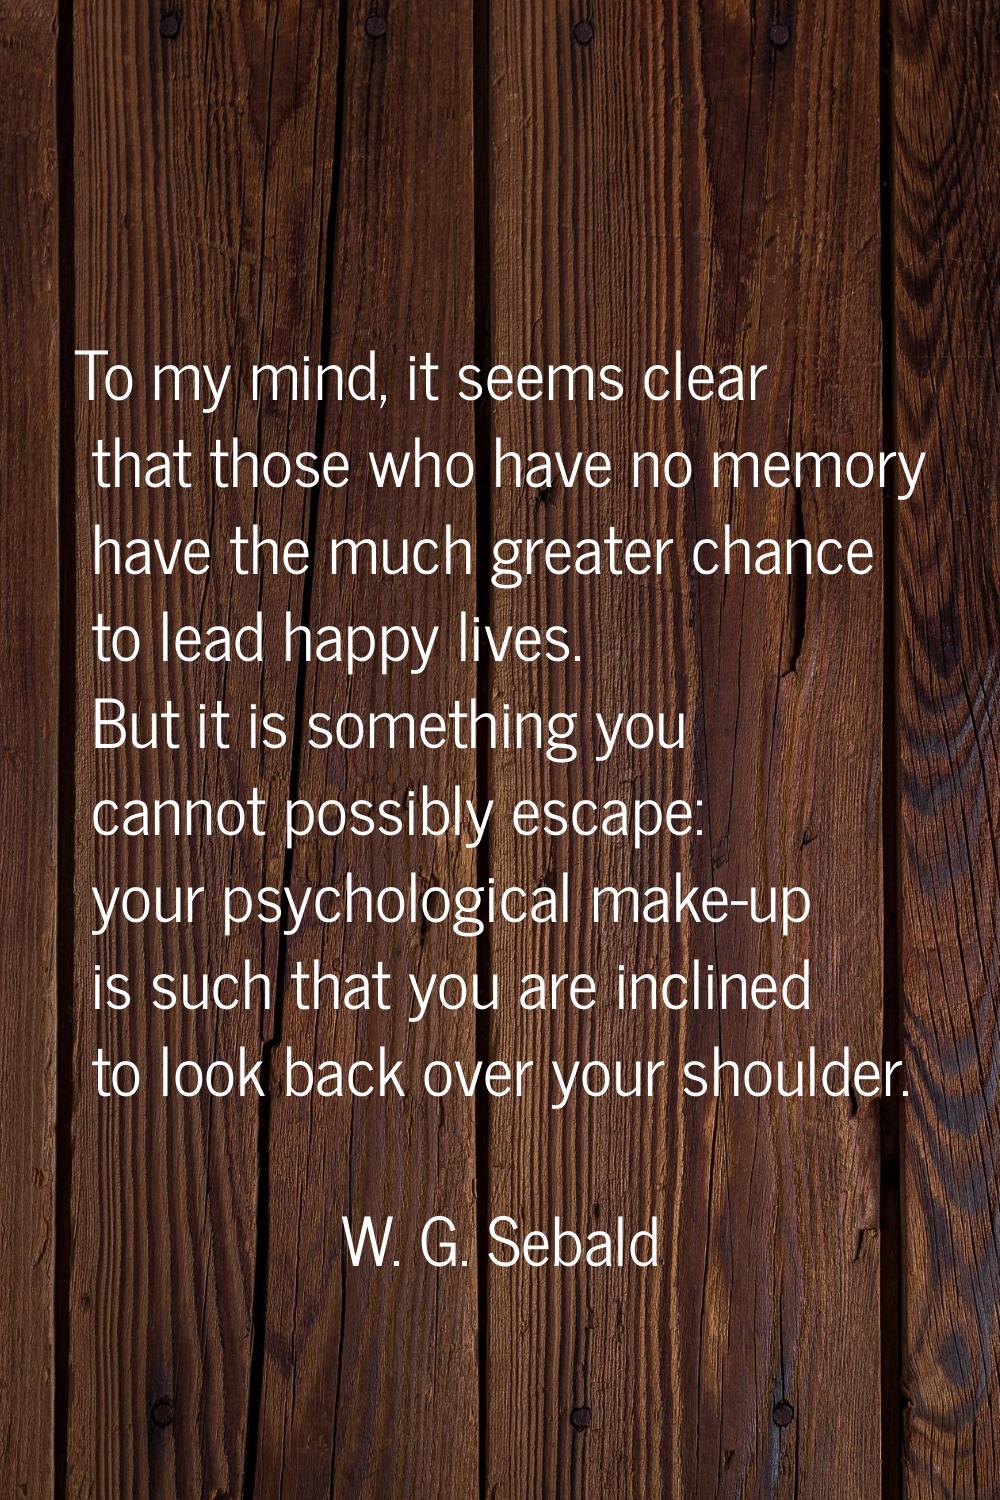 To my mind, it seems clear that those who have no memory have the much greater chance to lead happy